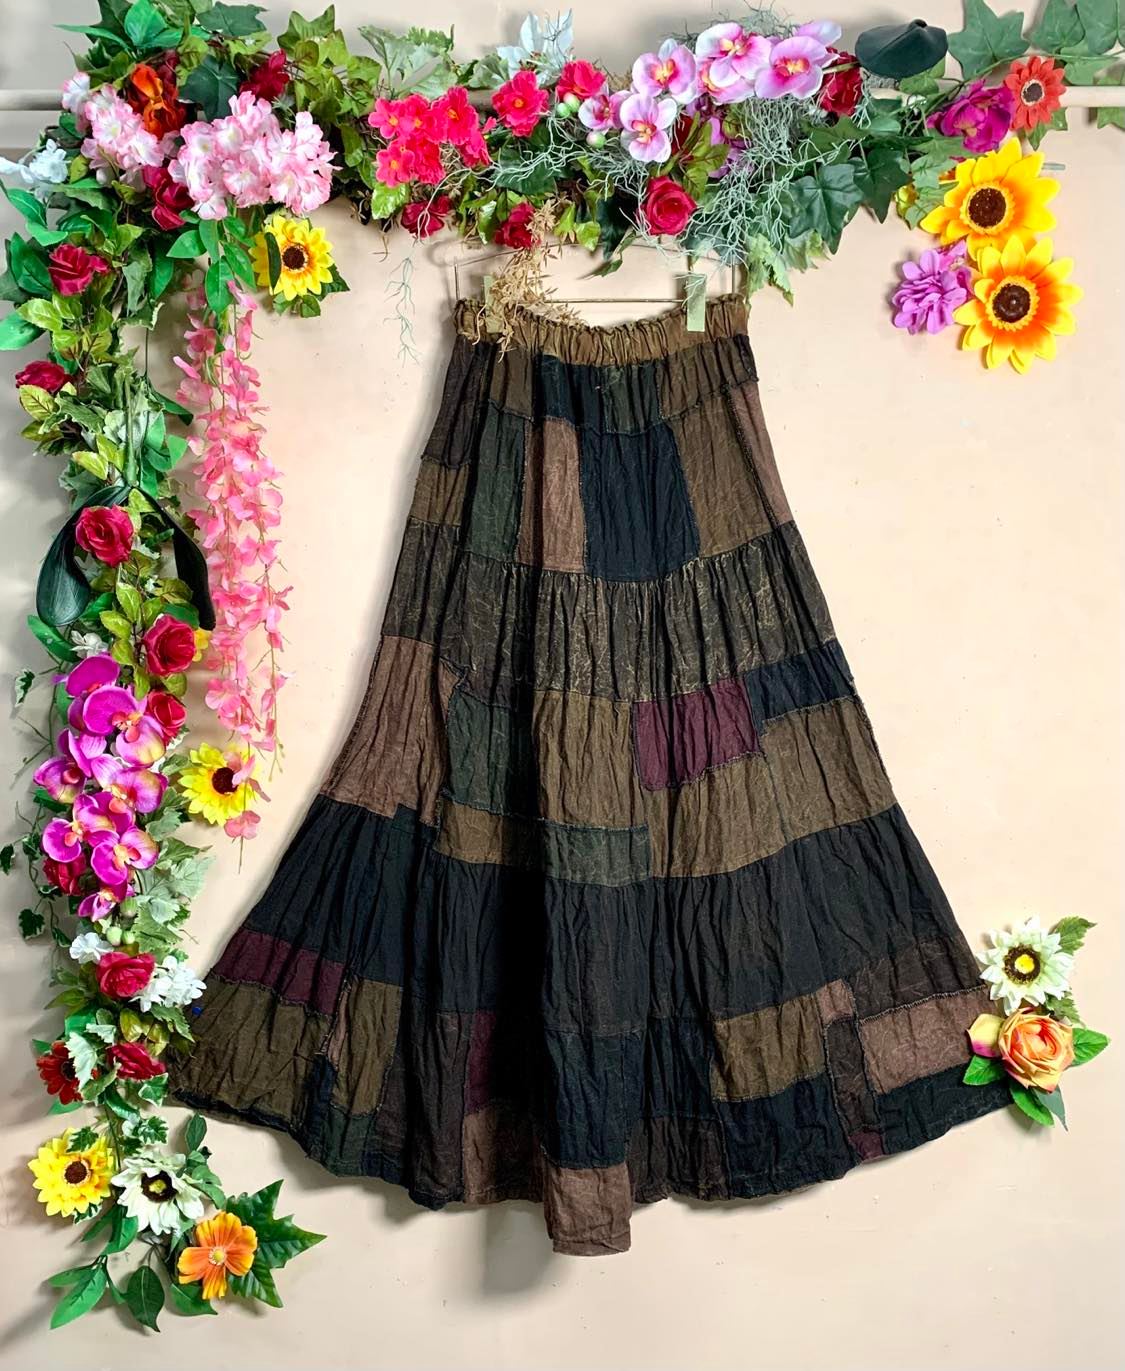 Hmong Gypsy Patchwork Skirt